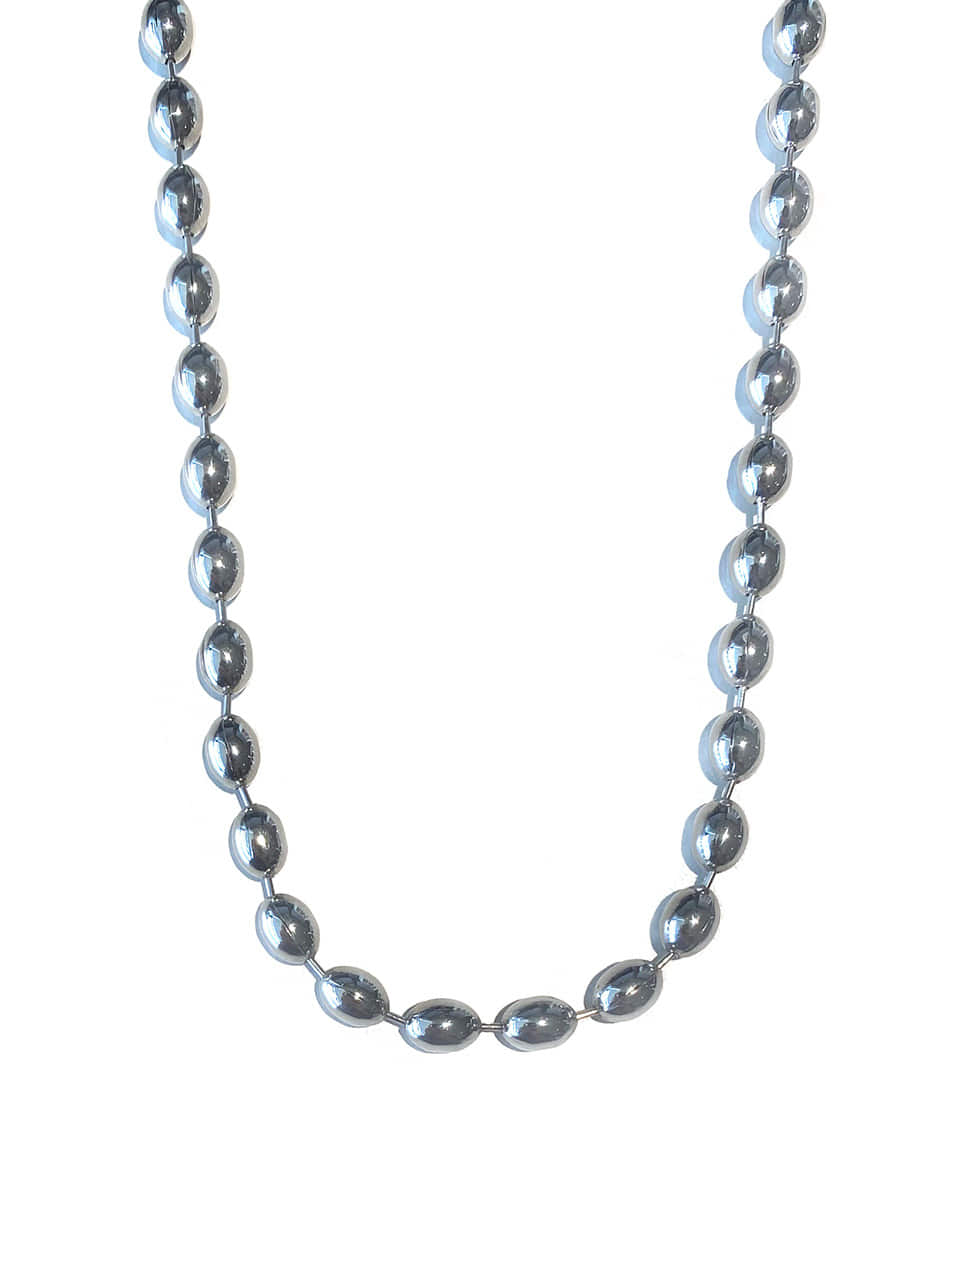 DV038 [Surgical steel] Oval necklace